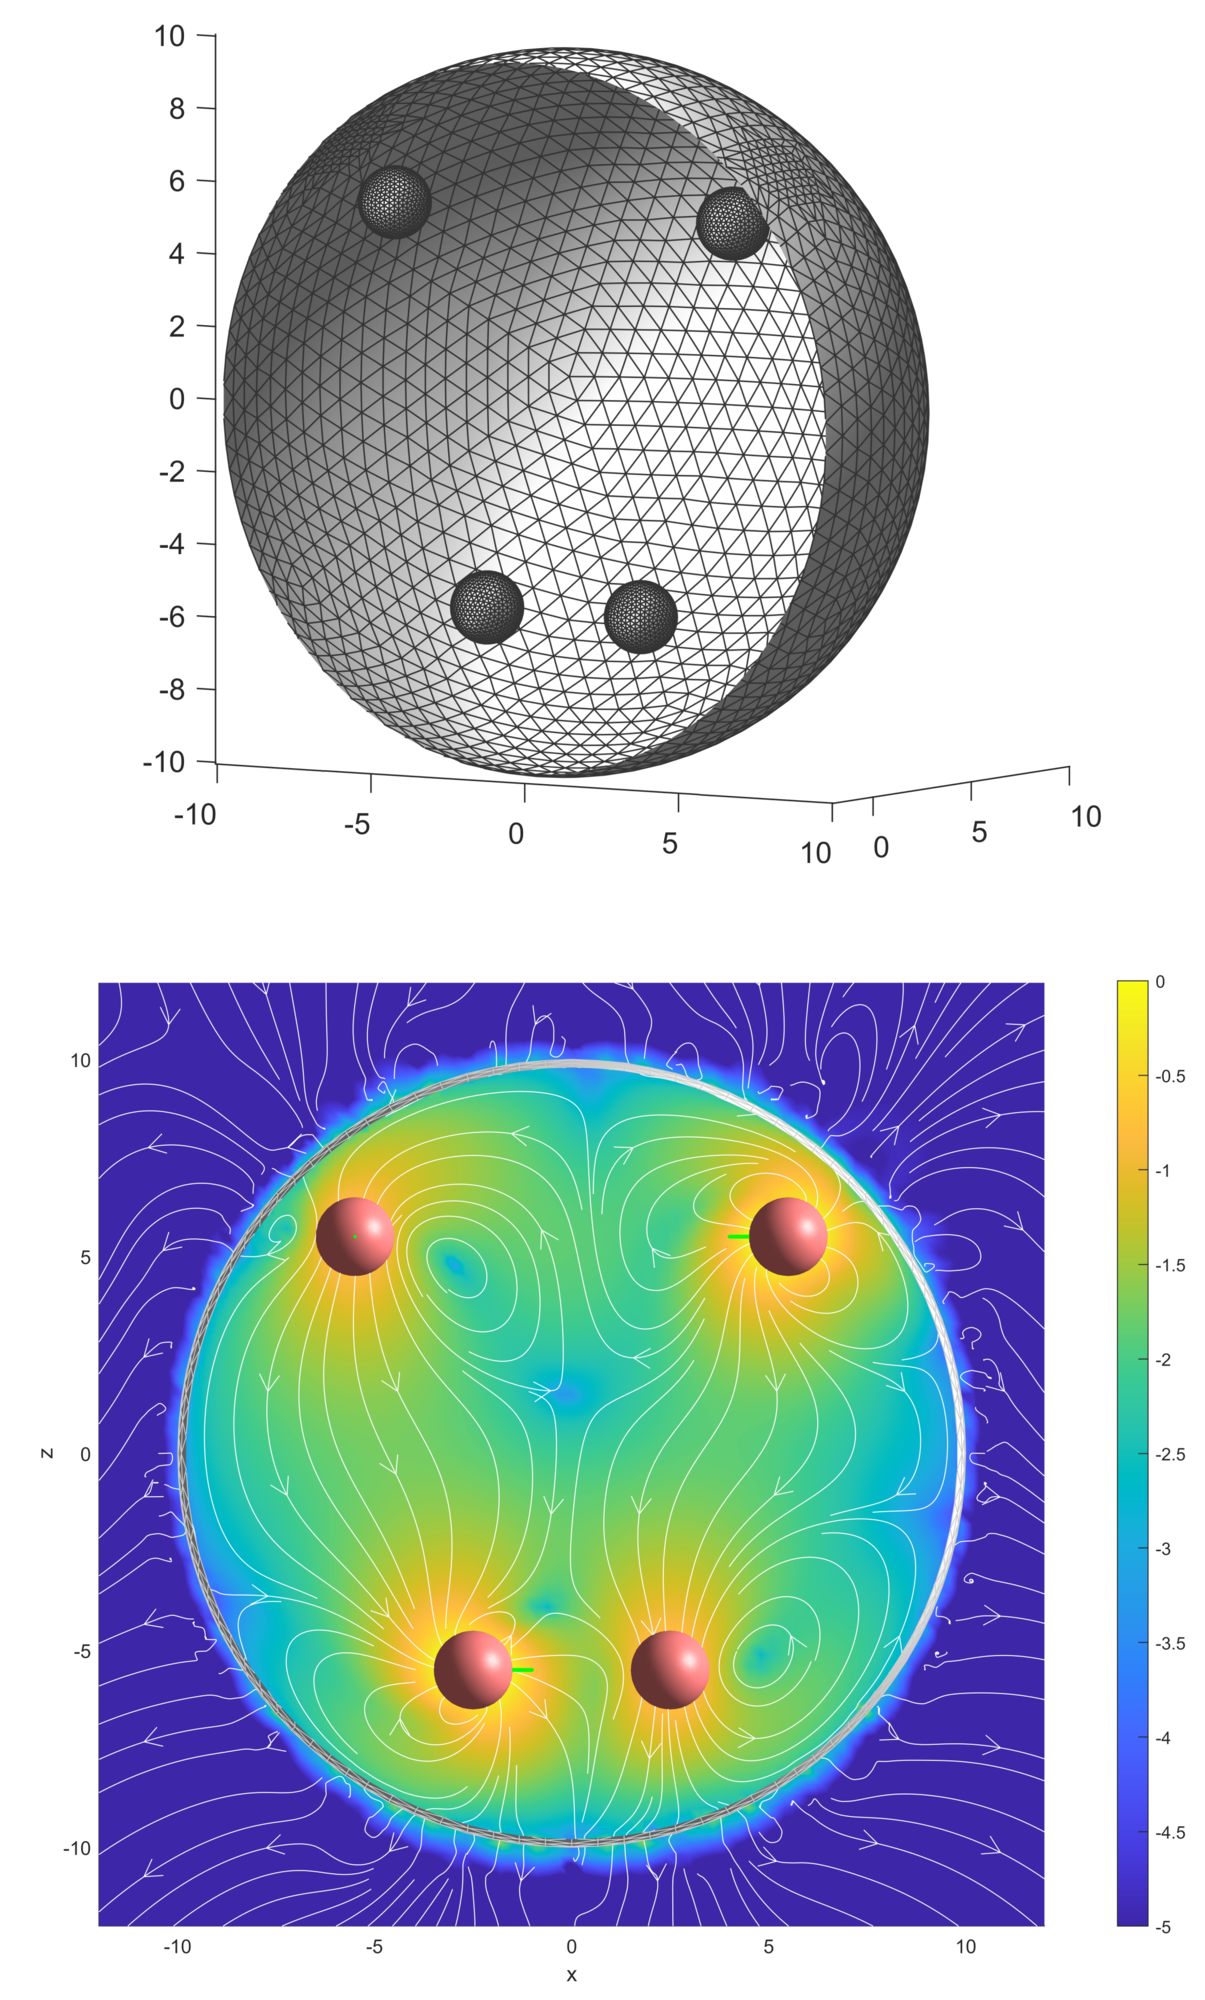 Active squirmers inside a spherical shell